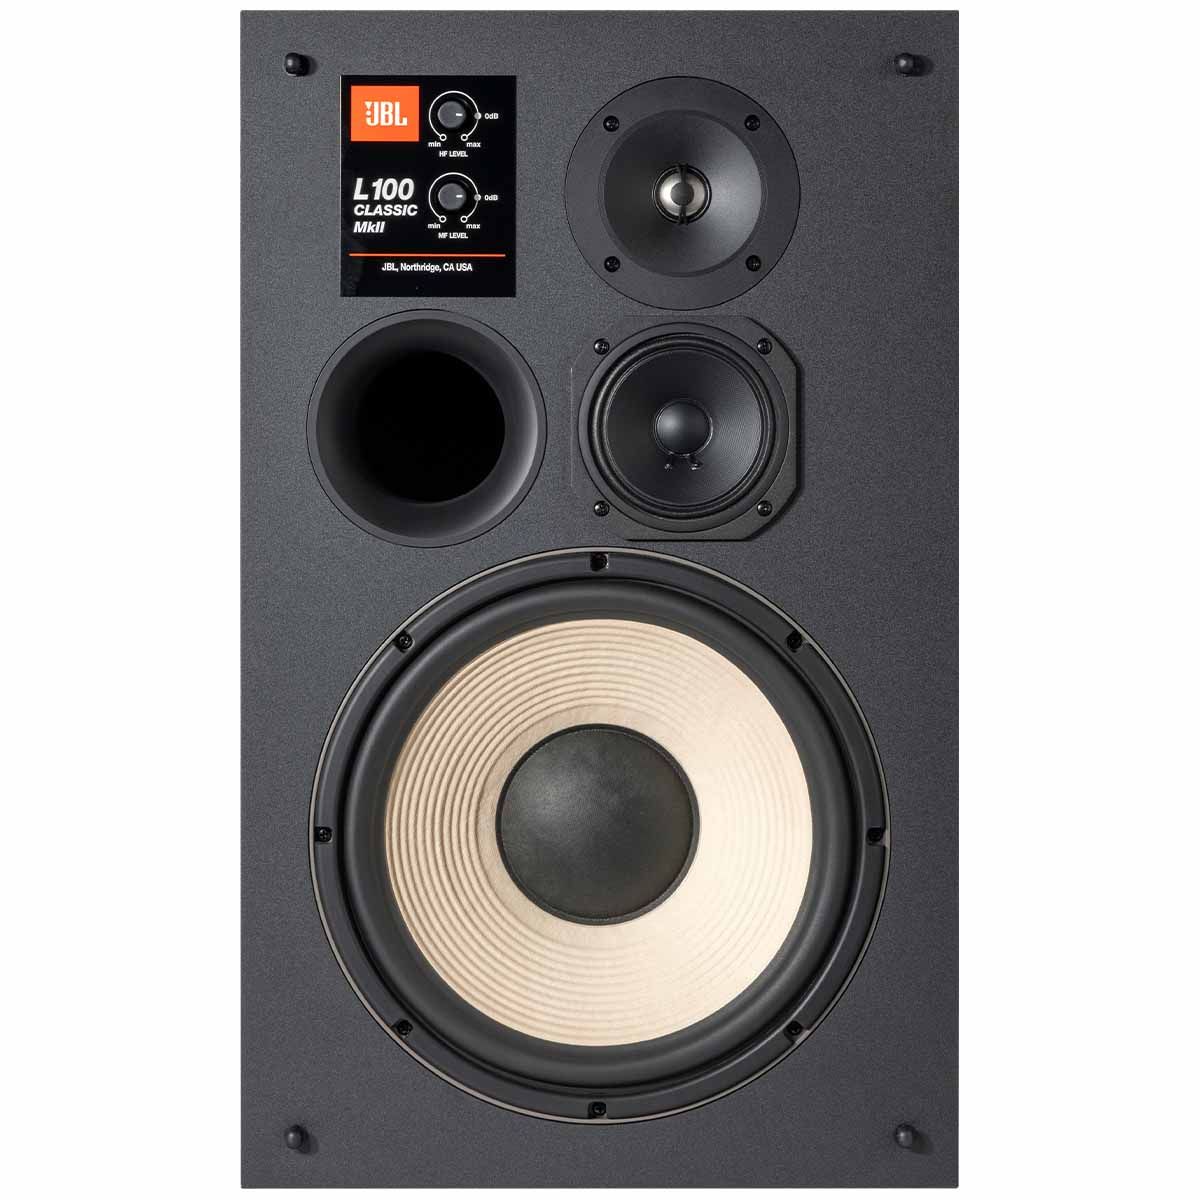 JBL L100 Classic MKII Loudspeaker Orange front view without grille